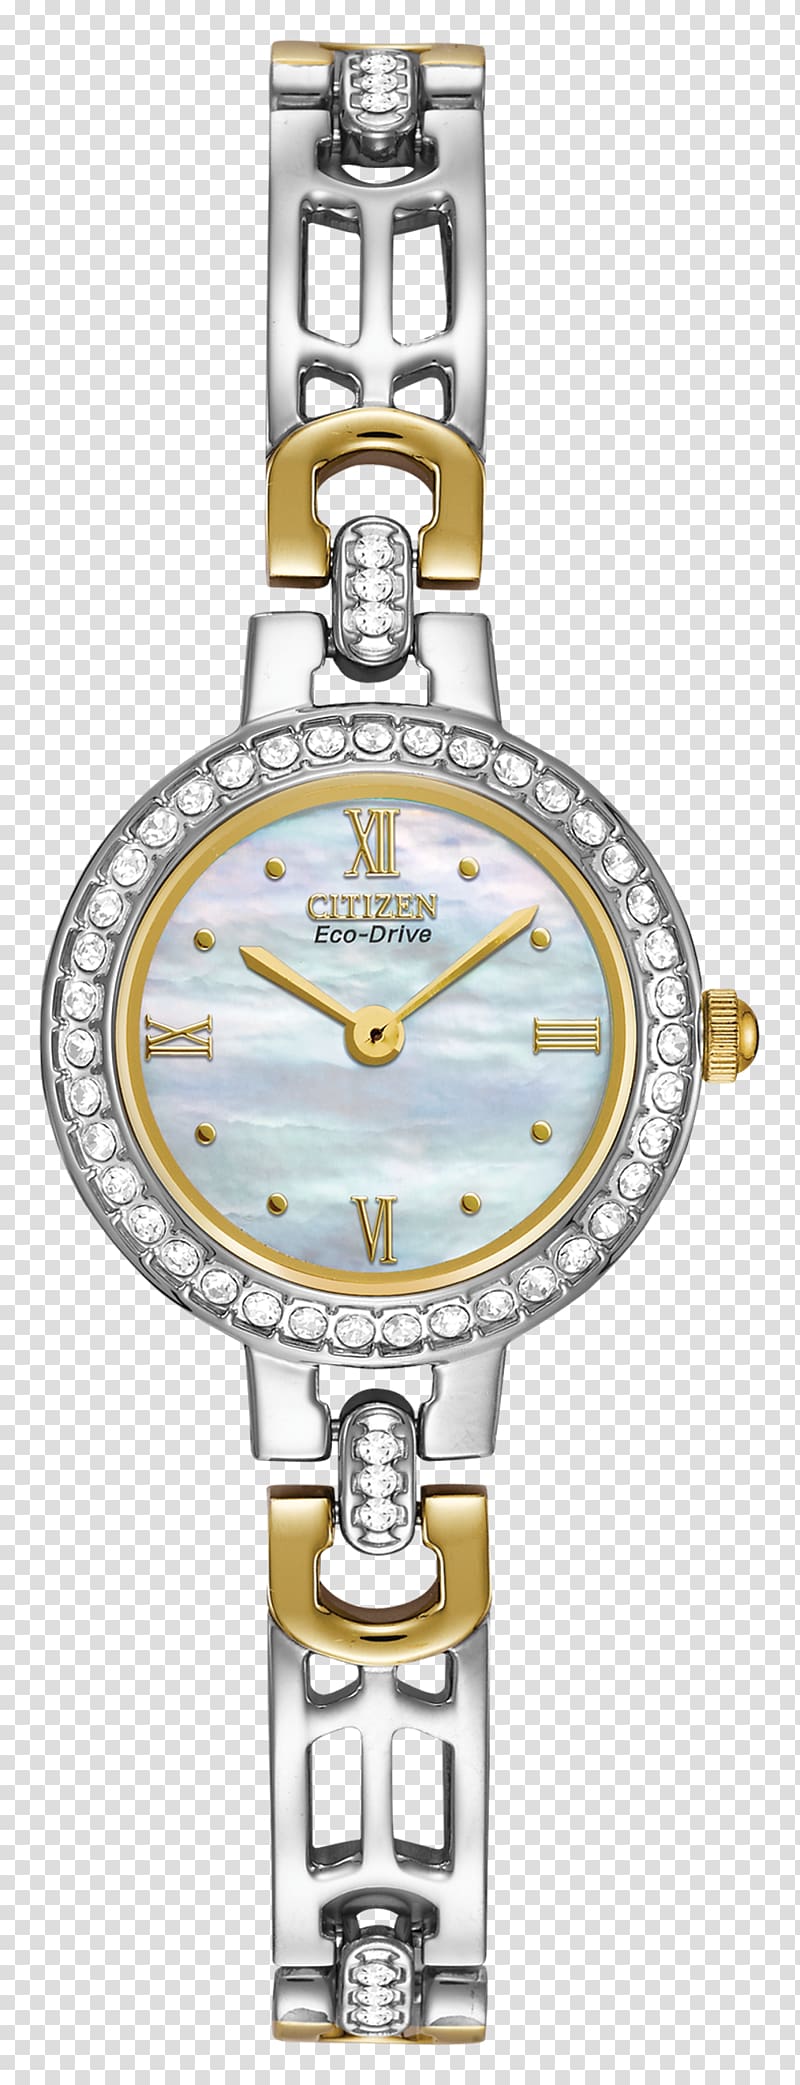 Eco-Drive Citizen Holdings Watch Jewellery Swarovski AG, watch transparent background PNG clipart